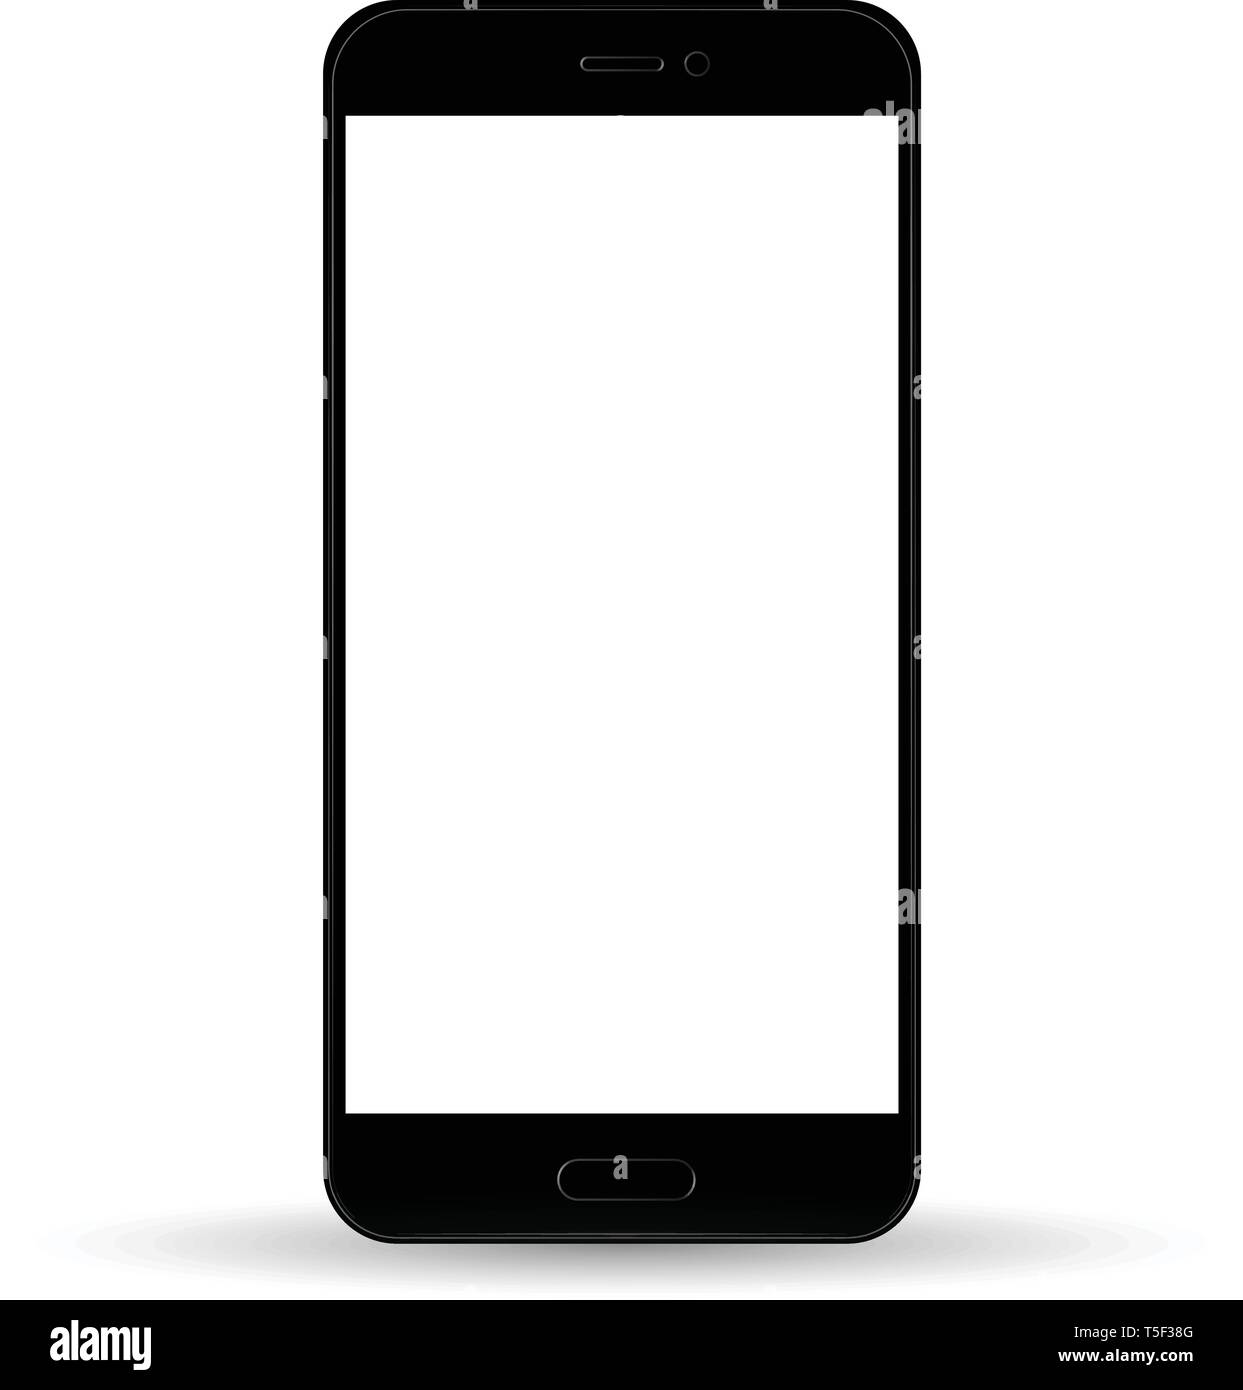 Smartphone in iphone style black color with blank touch screen isolated on transparent background. stock vector illustration Stock Vector